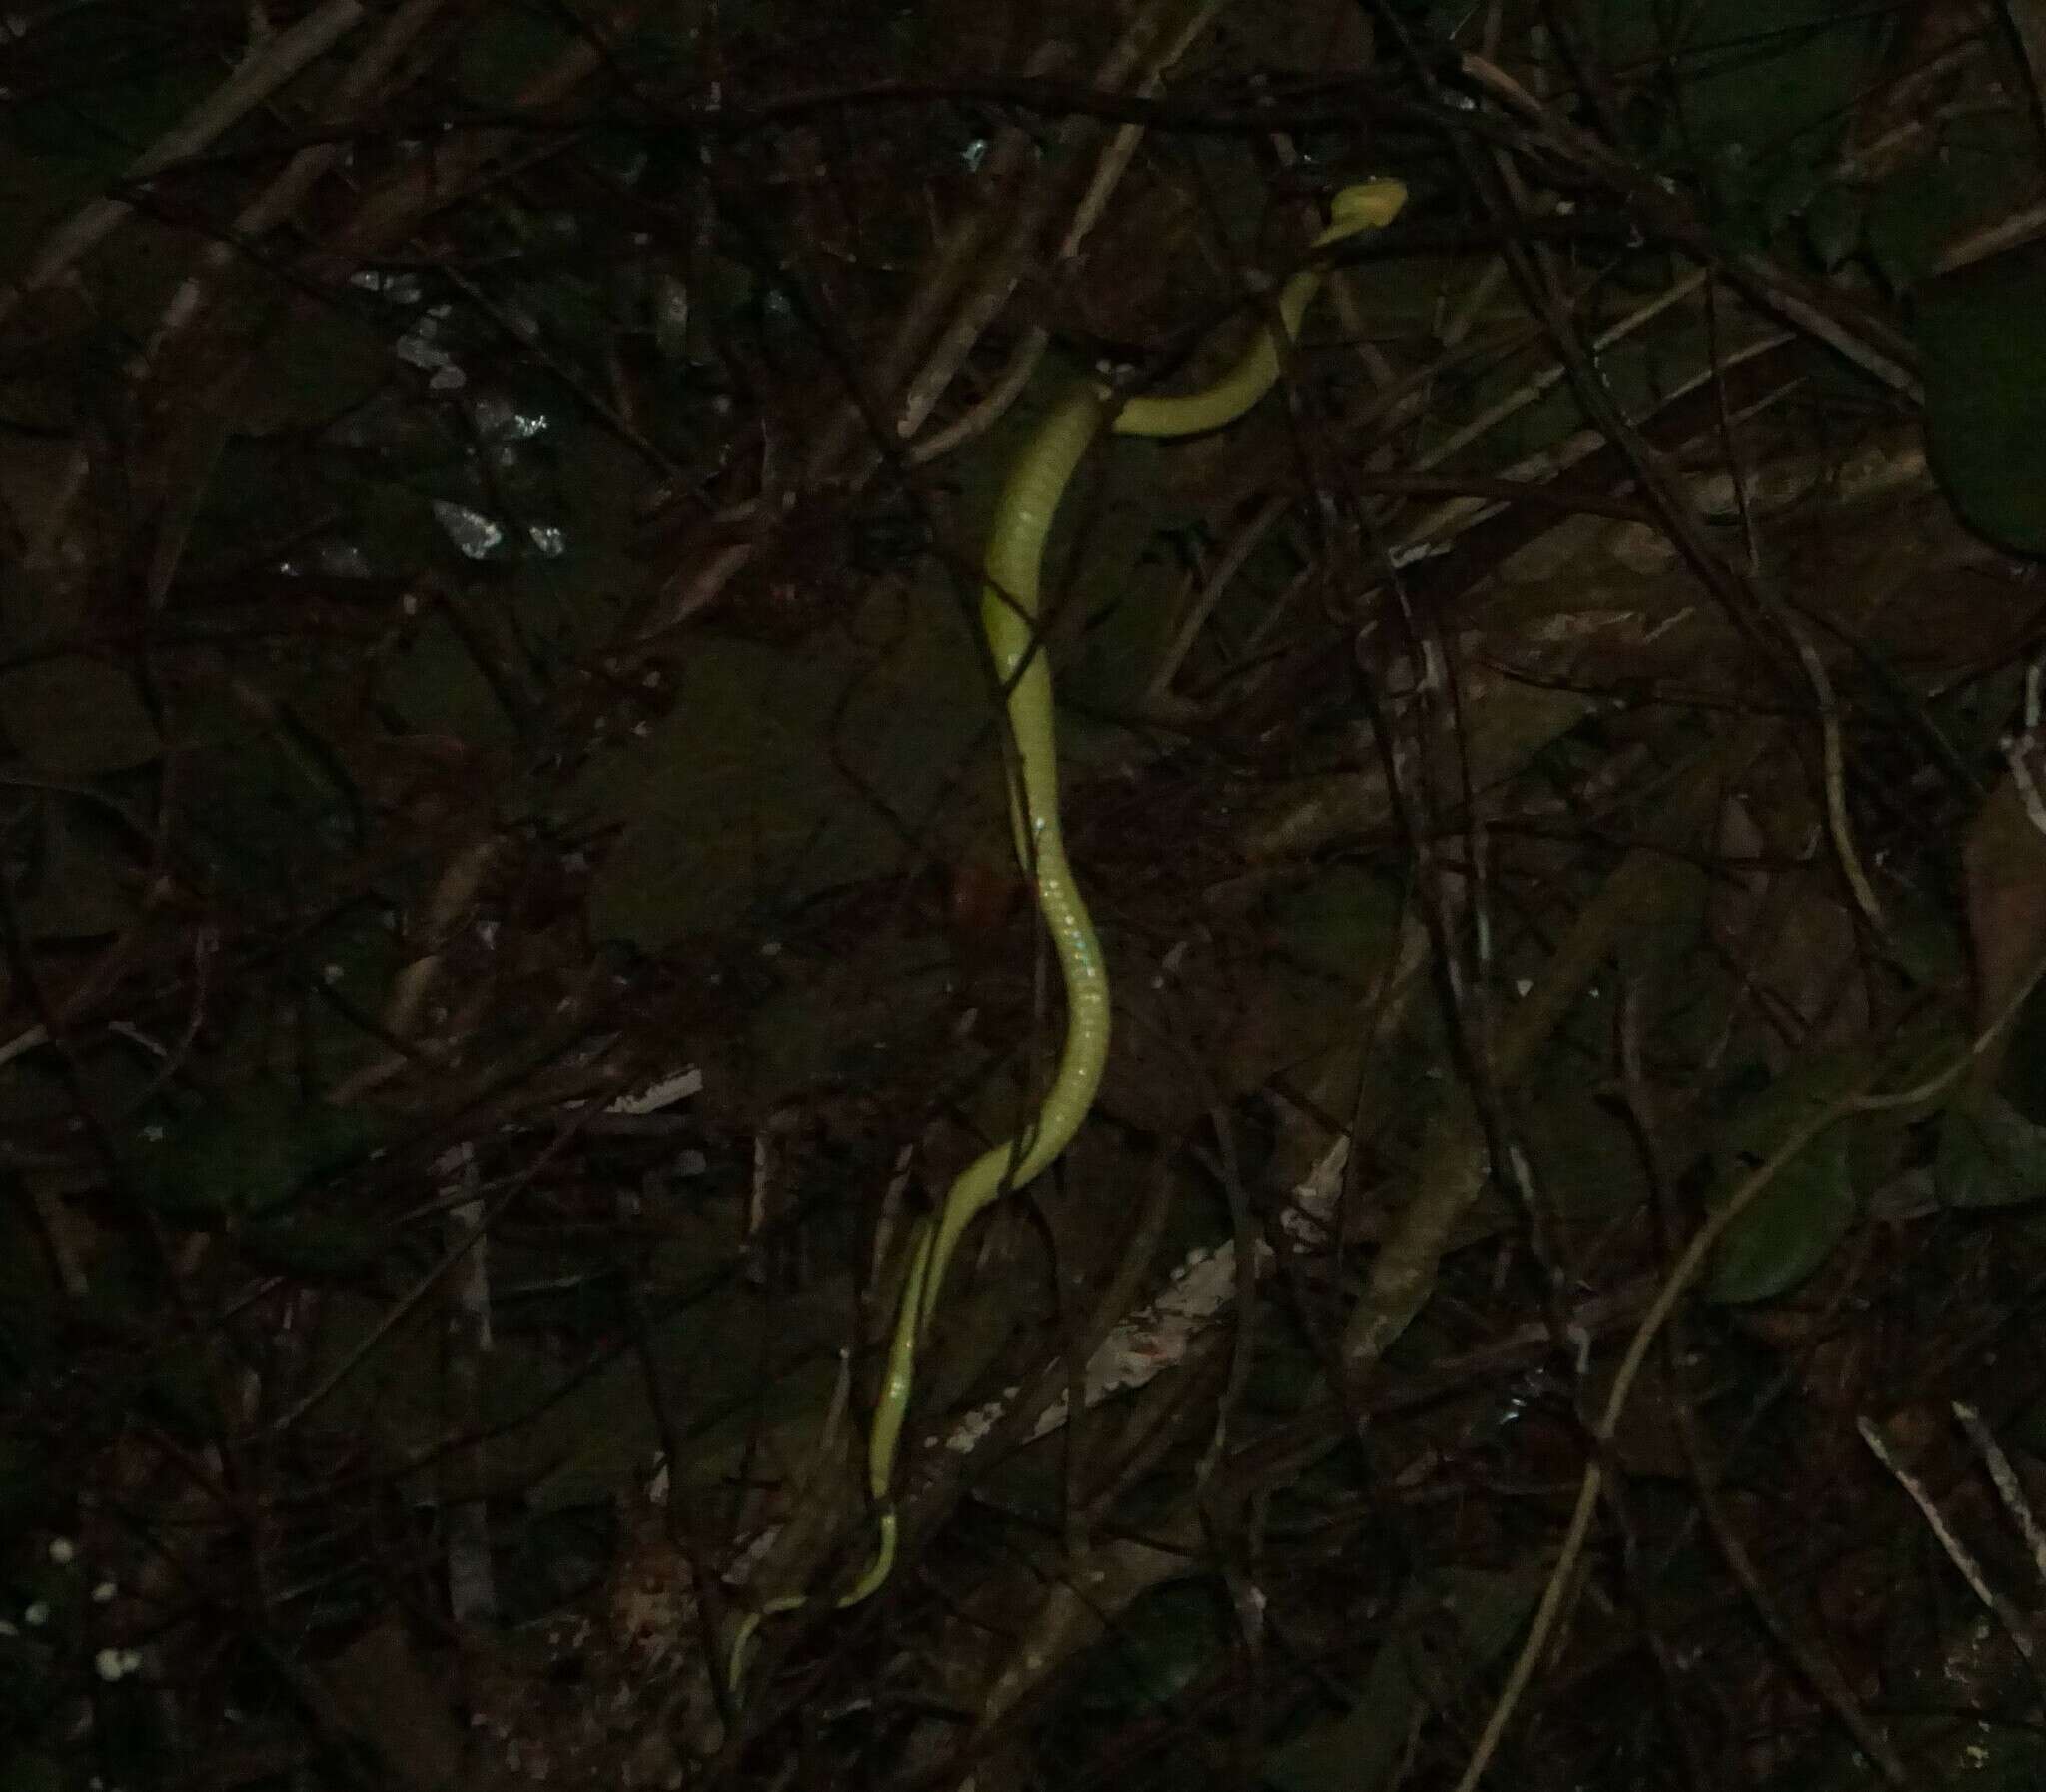 Image of March's Palm Pit Viper